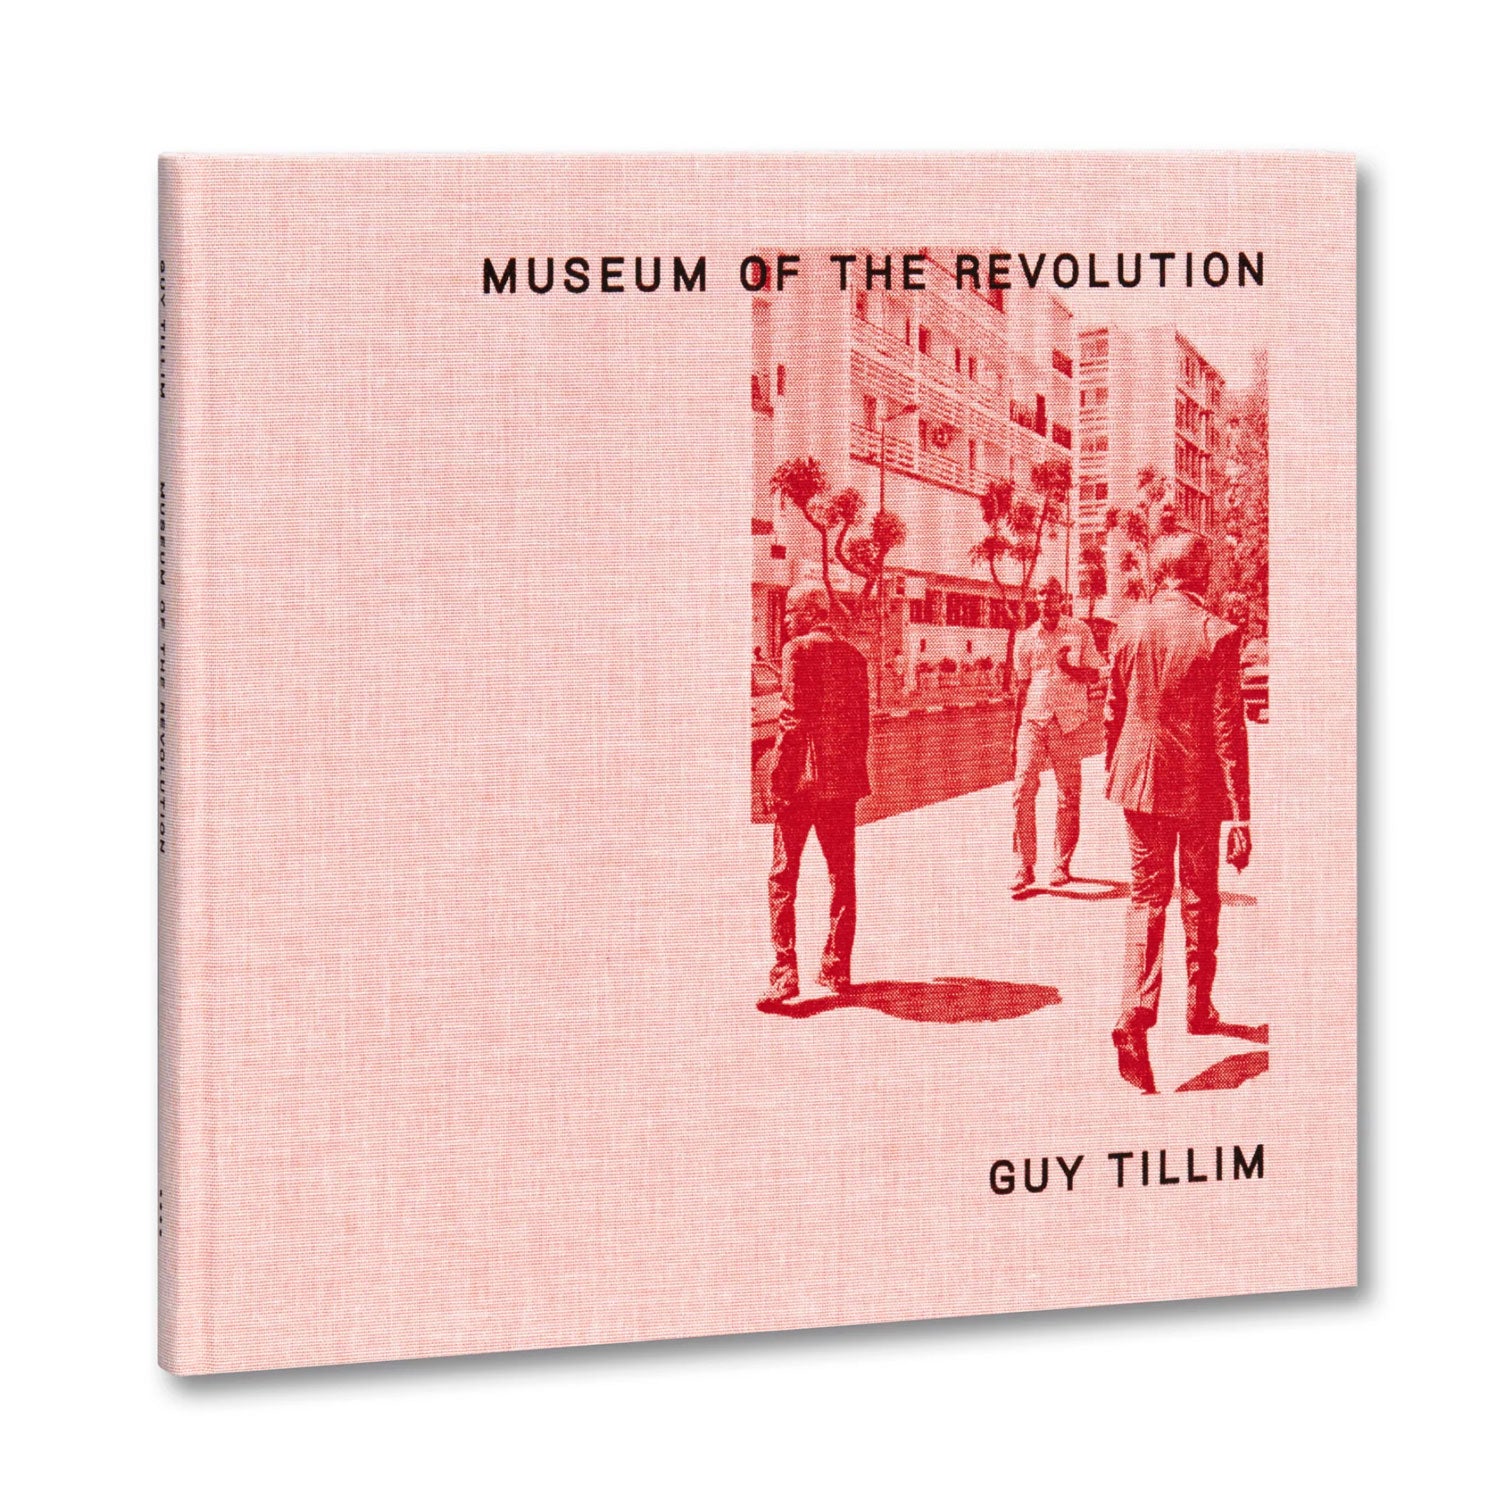 Museum of the Revolution by Guy Tillim Photo Museum Ireland